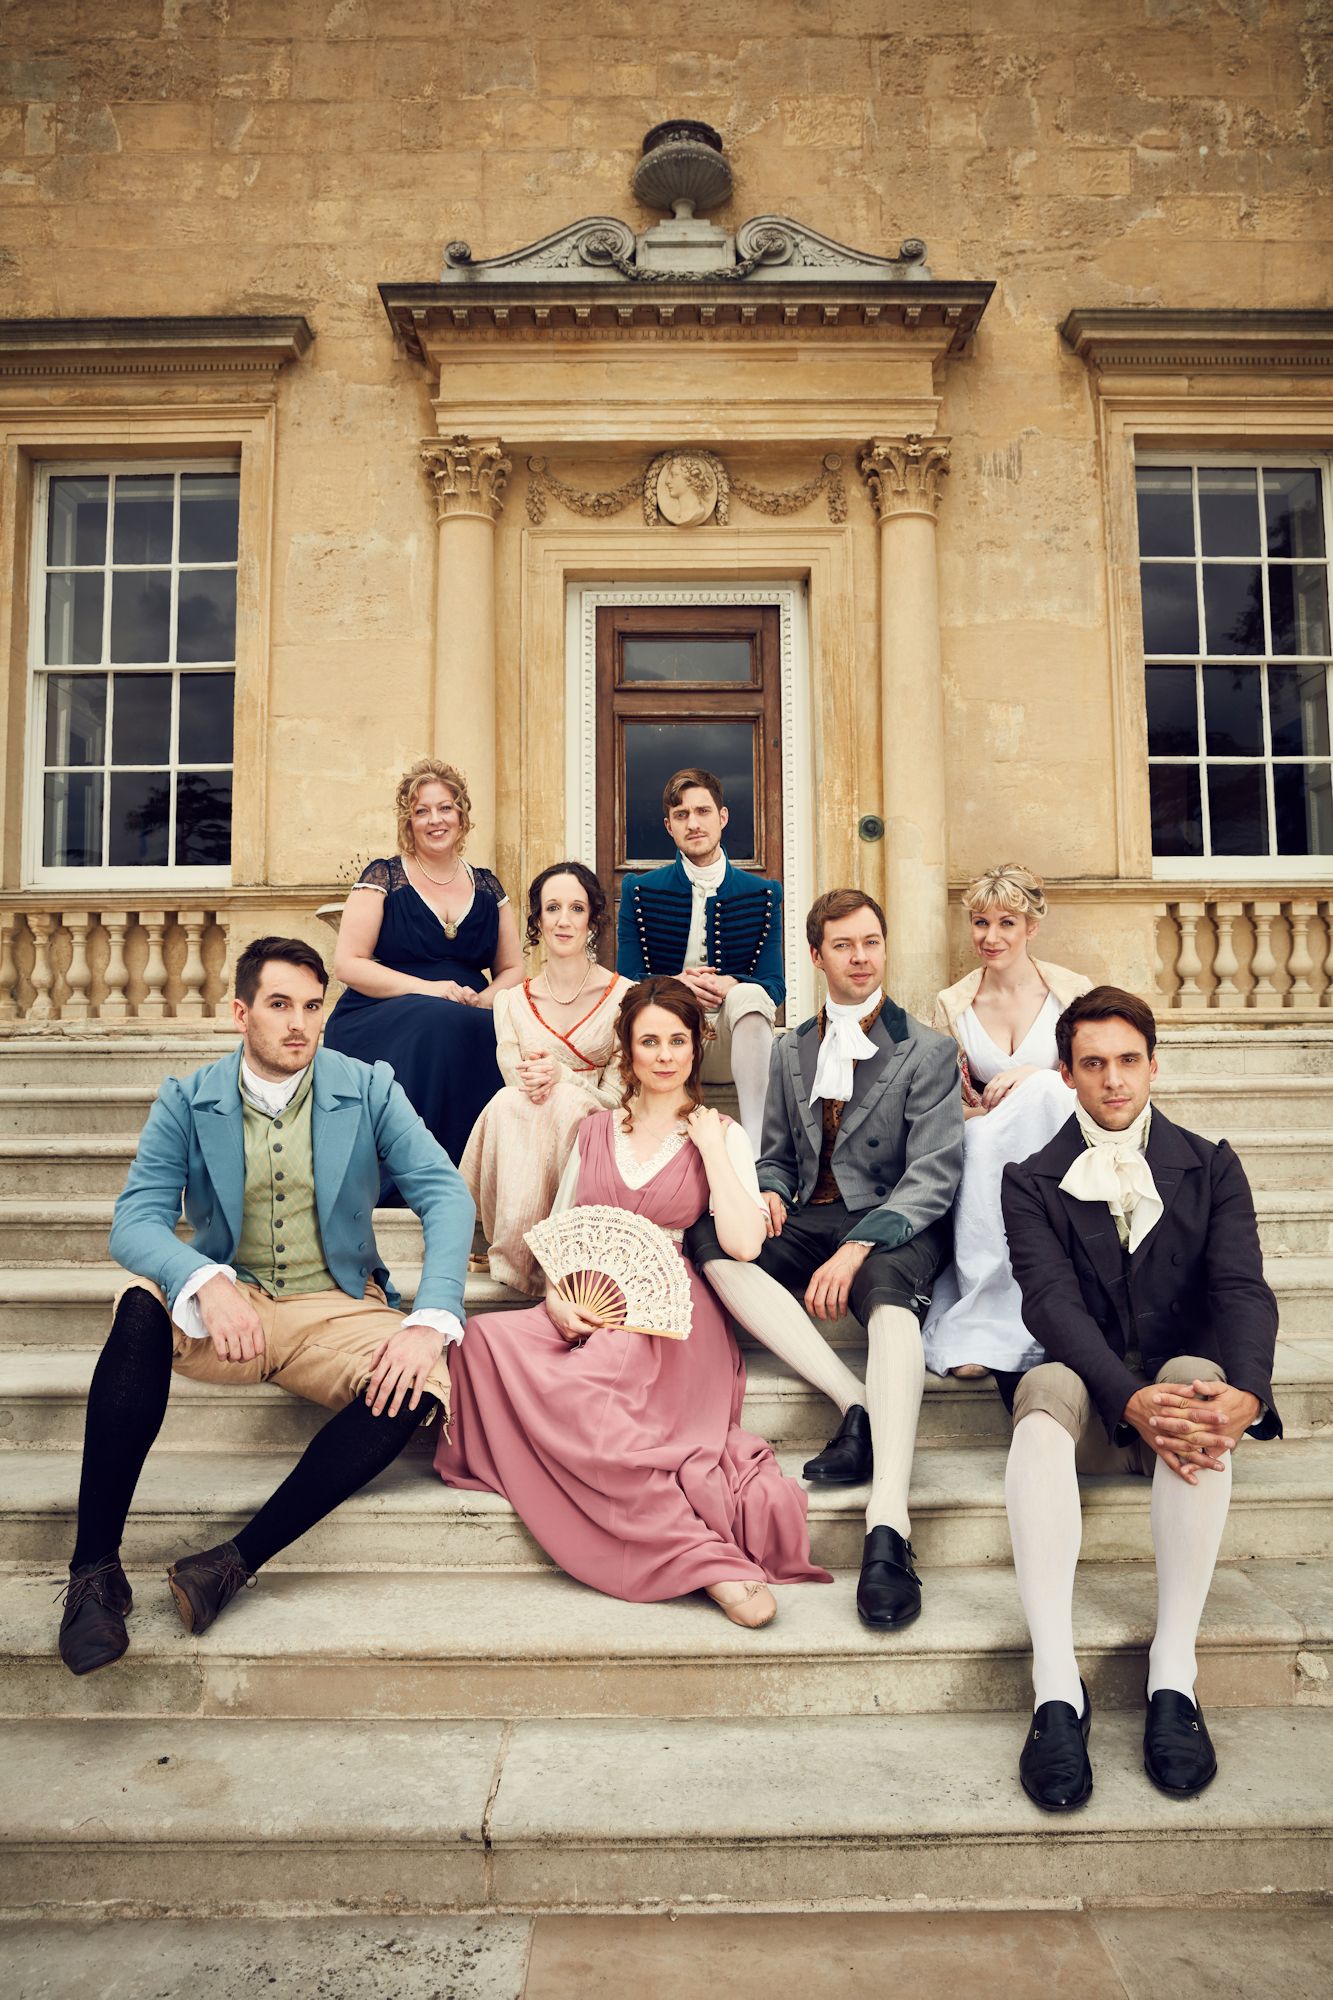 Eight performers in regency costumes sit on the steps of a large manorhouse.